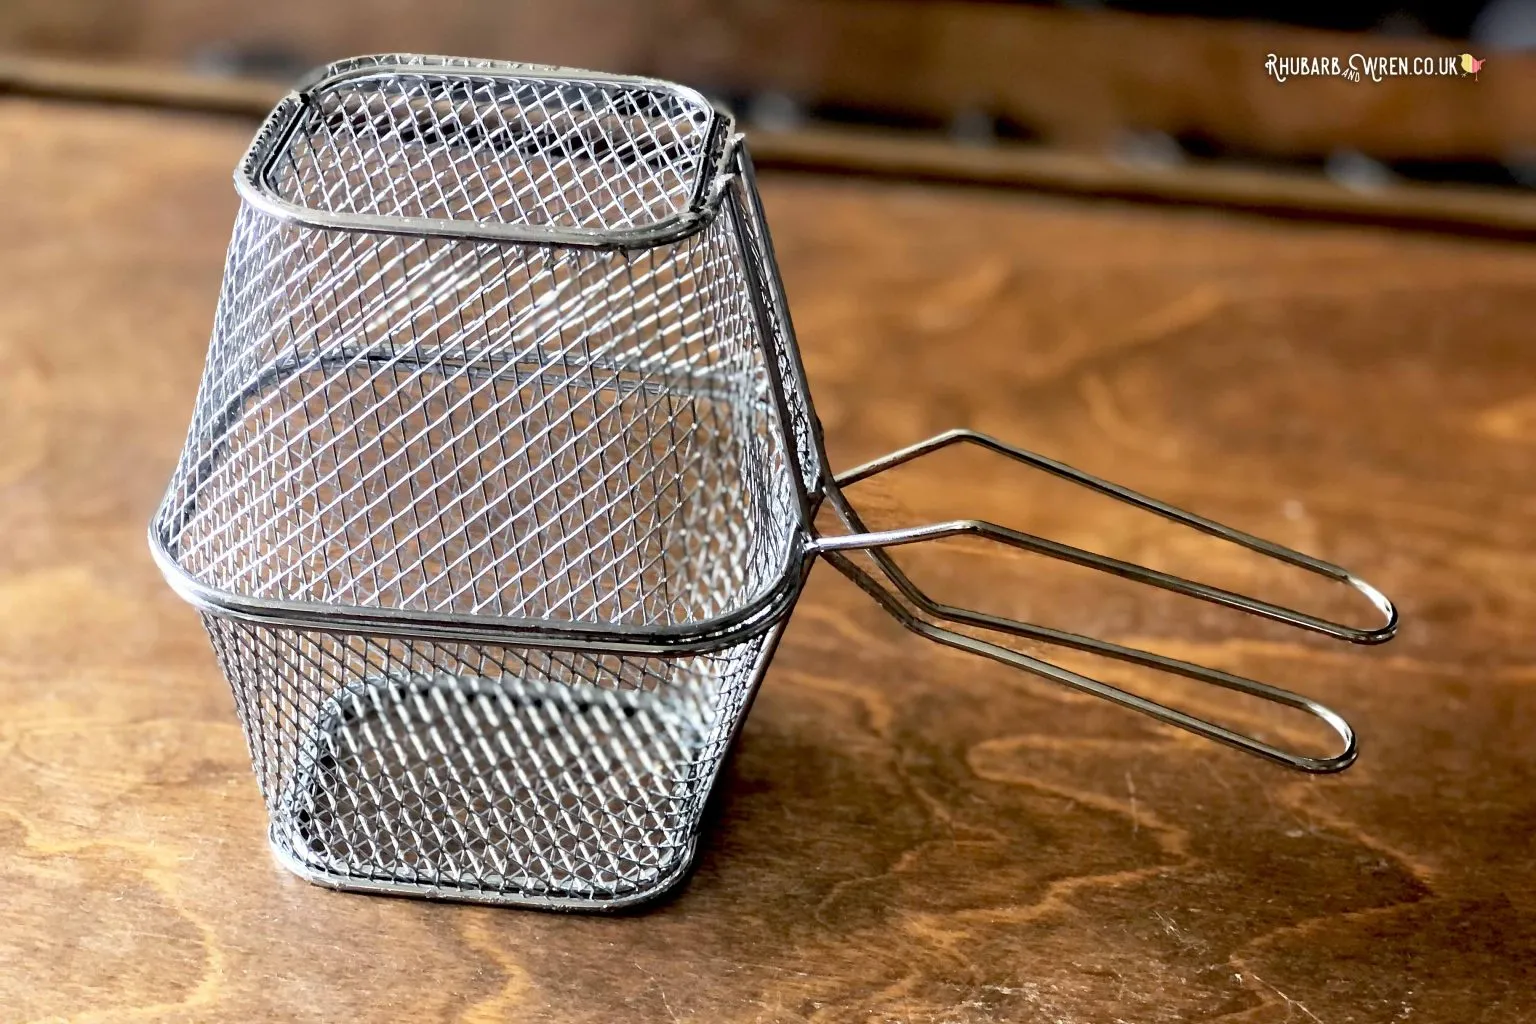 Mini frying baskets being used to make a popcorn pan for a campfire